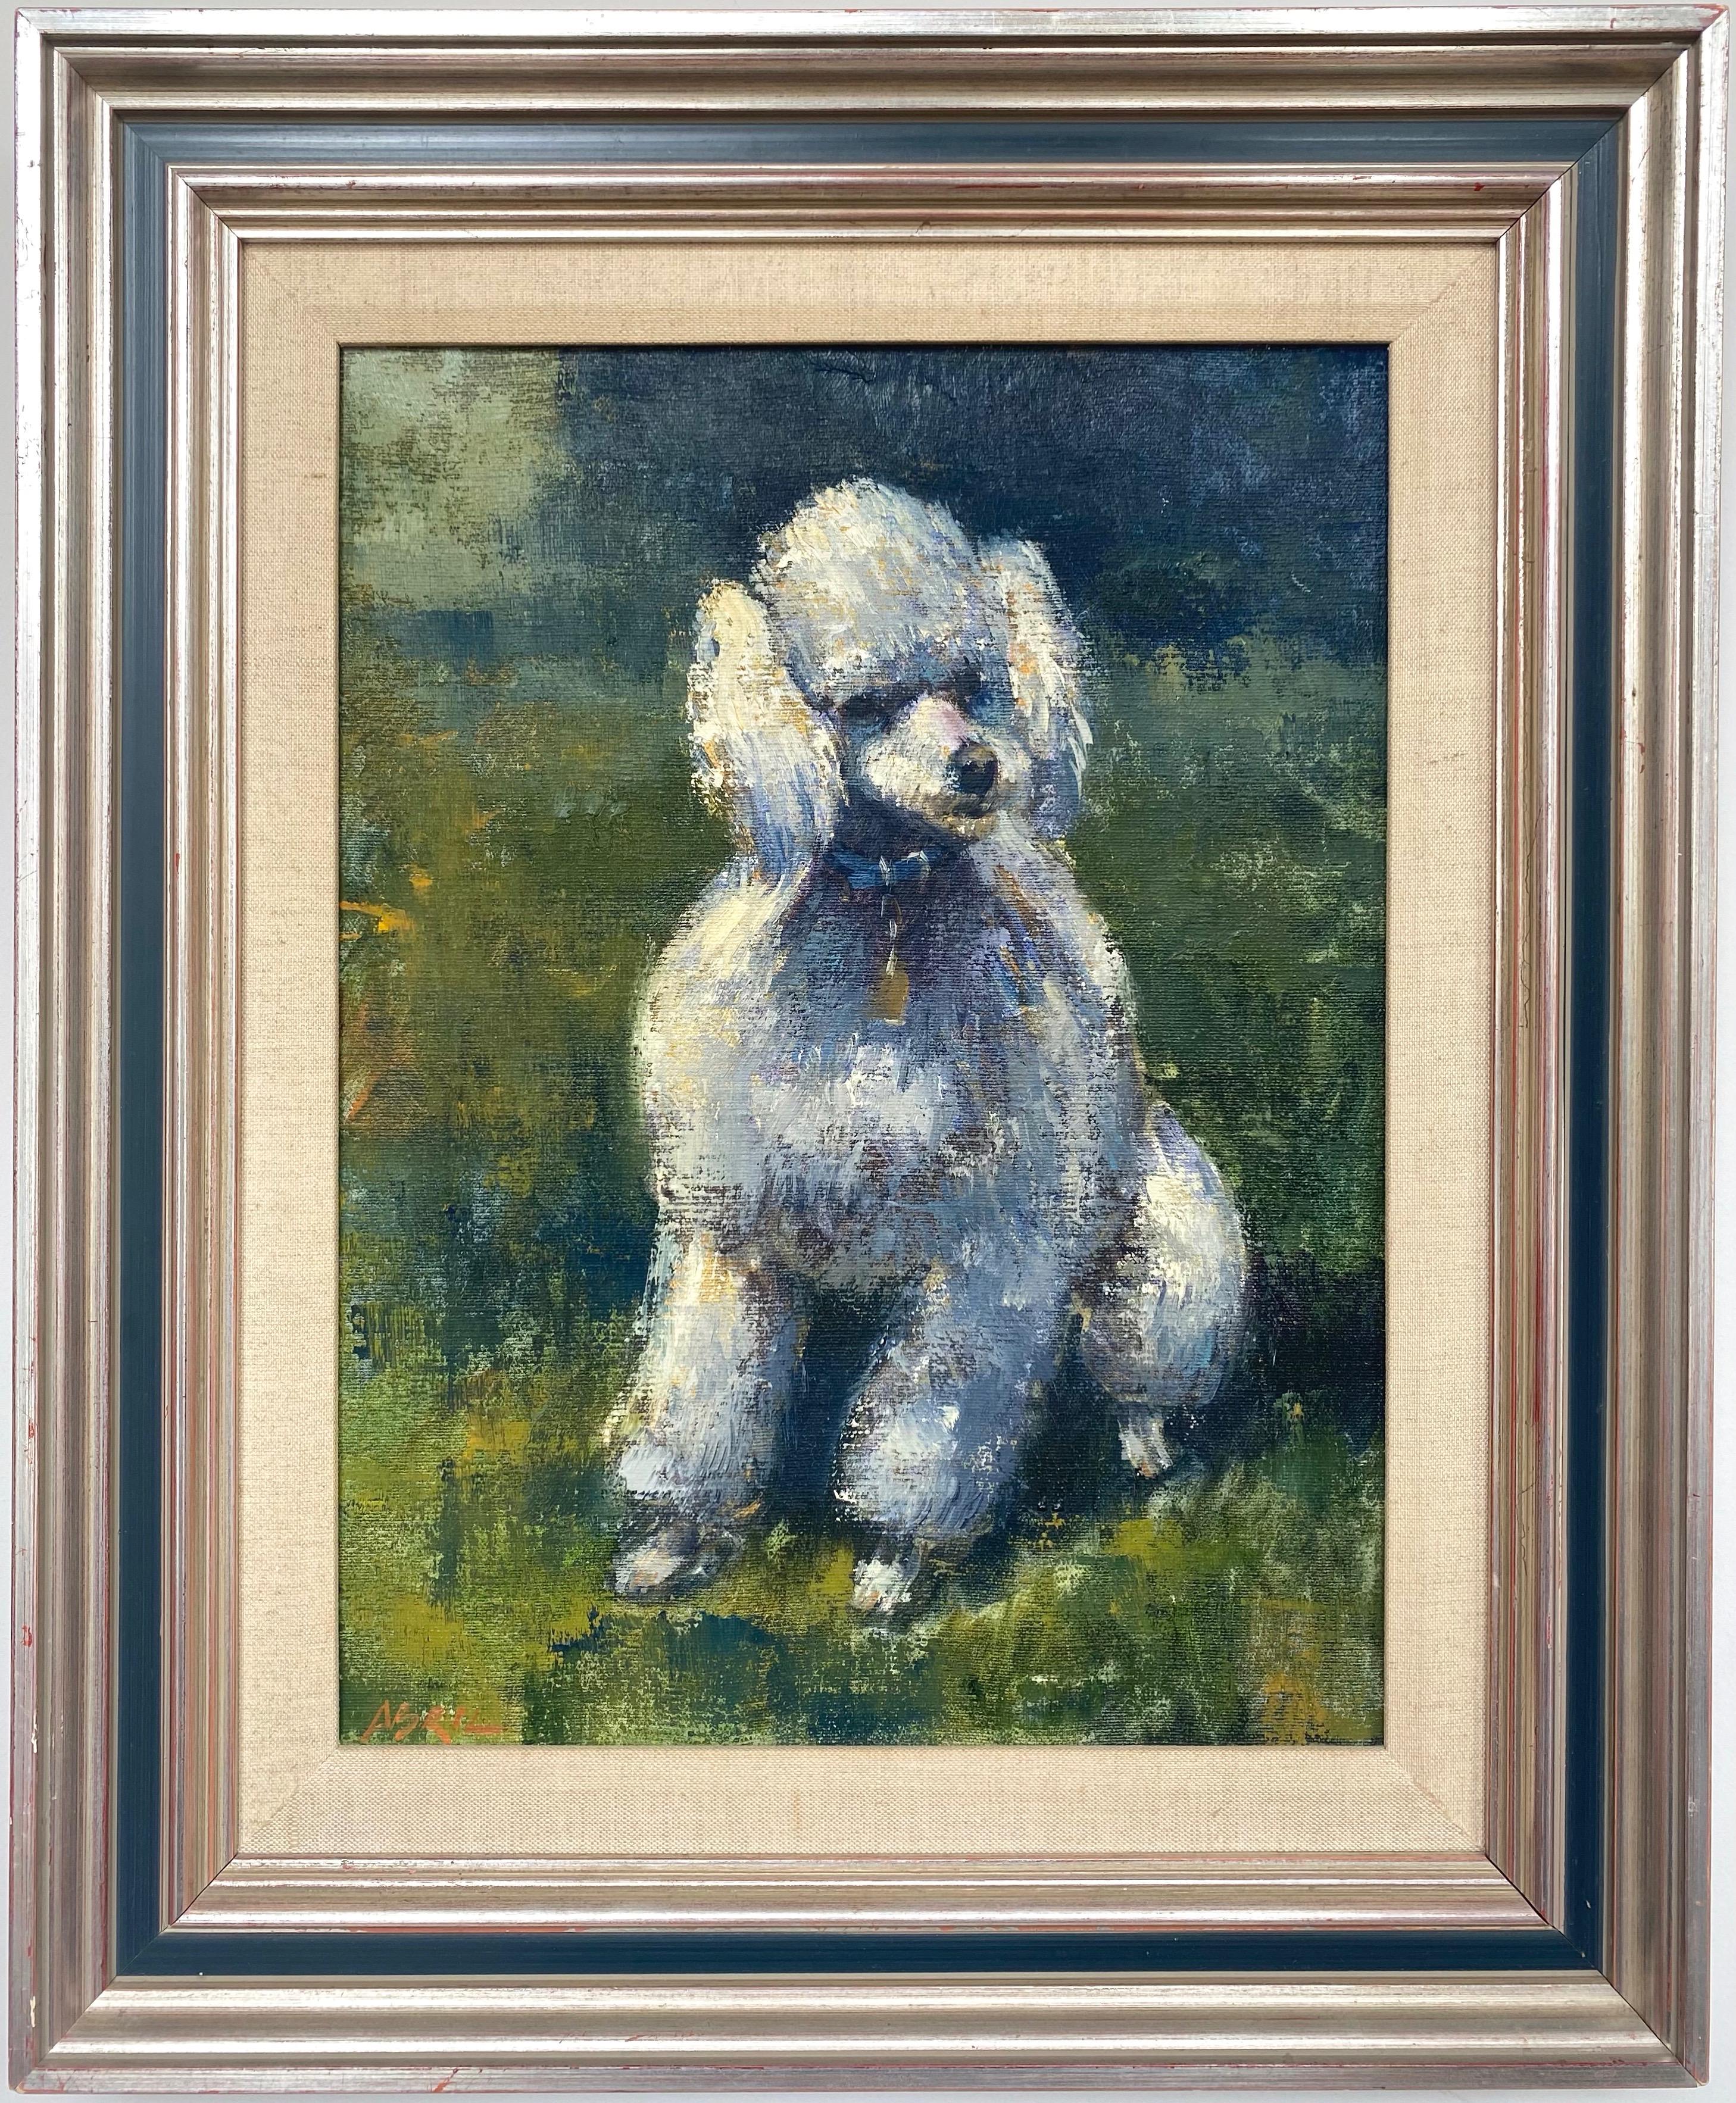 A very fetching untitled 1960s oil on canvas Impressionist portrait painting of what we believe might be former President Richard Nixon’s French poodle, Vicky, by important mid-century Los Angeles artist Ben Abril.

Softly done depiction of the